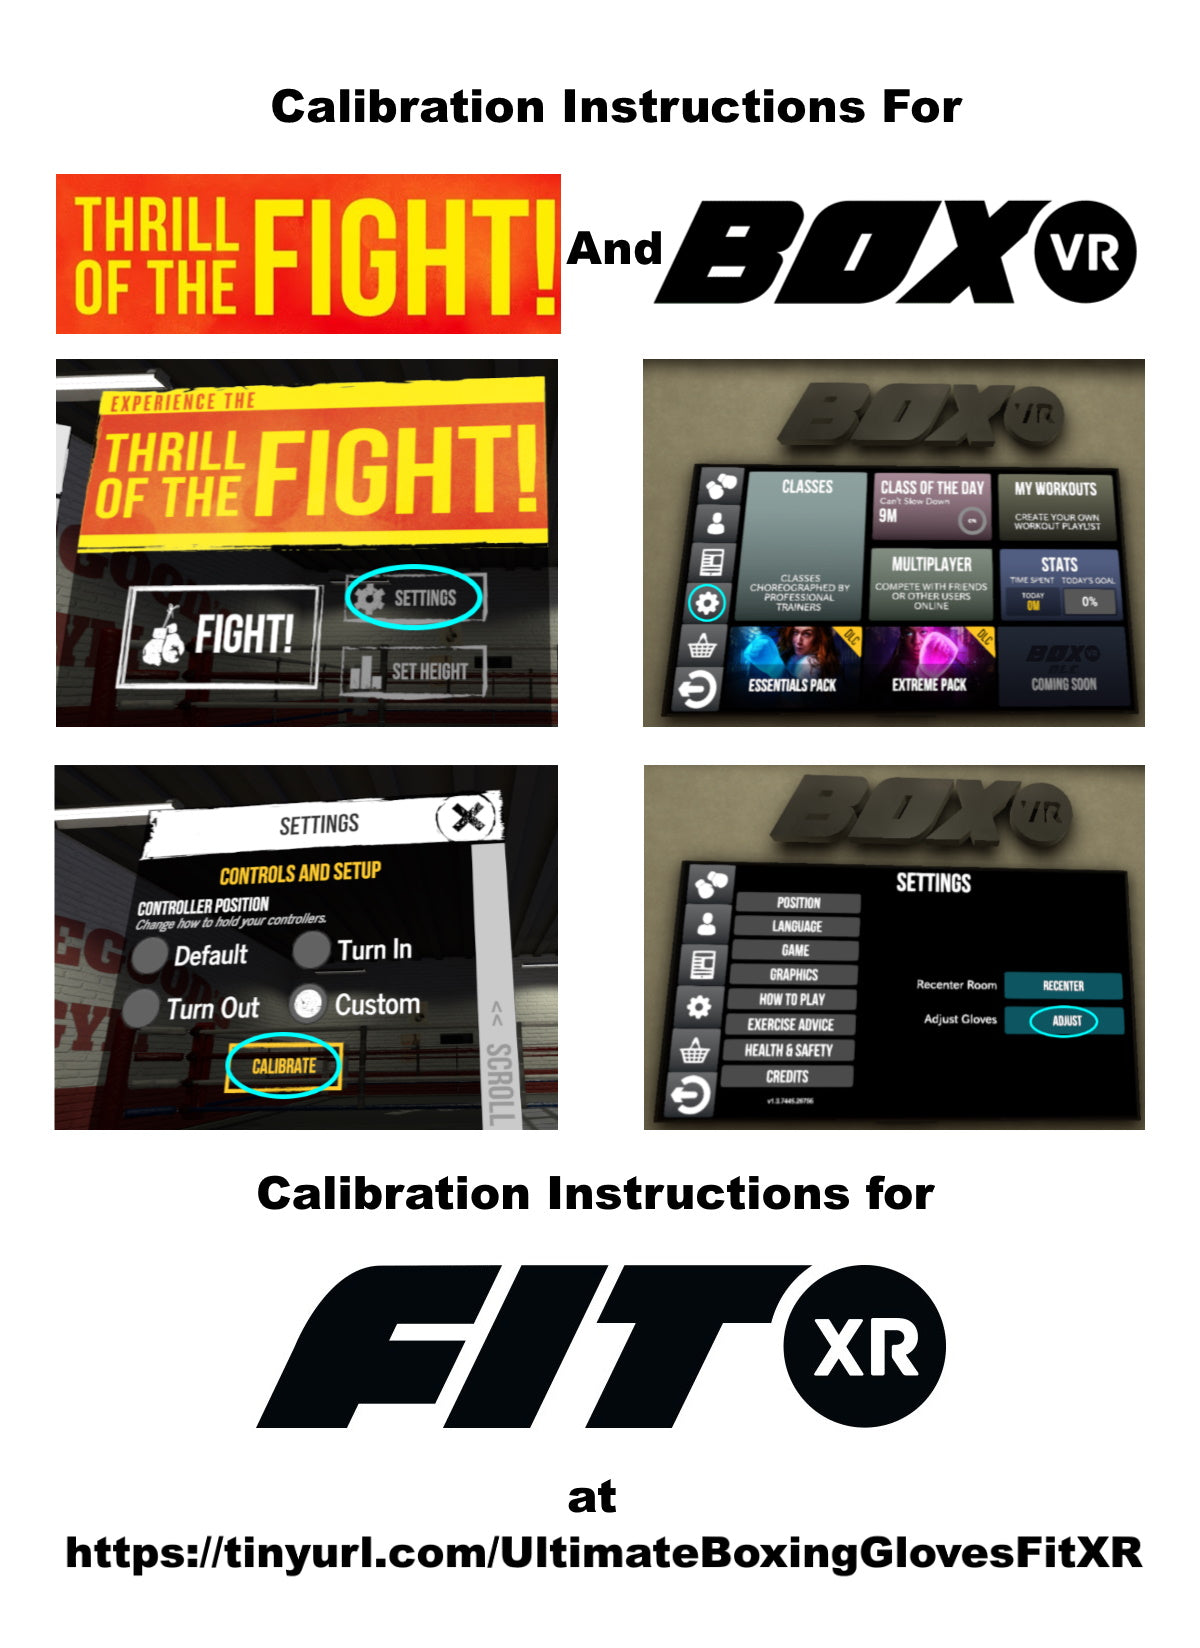 Calibration Instructions for Thrill of the Fight BoxVR and FitXR